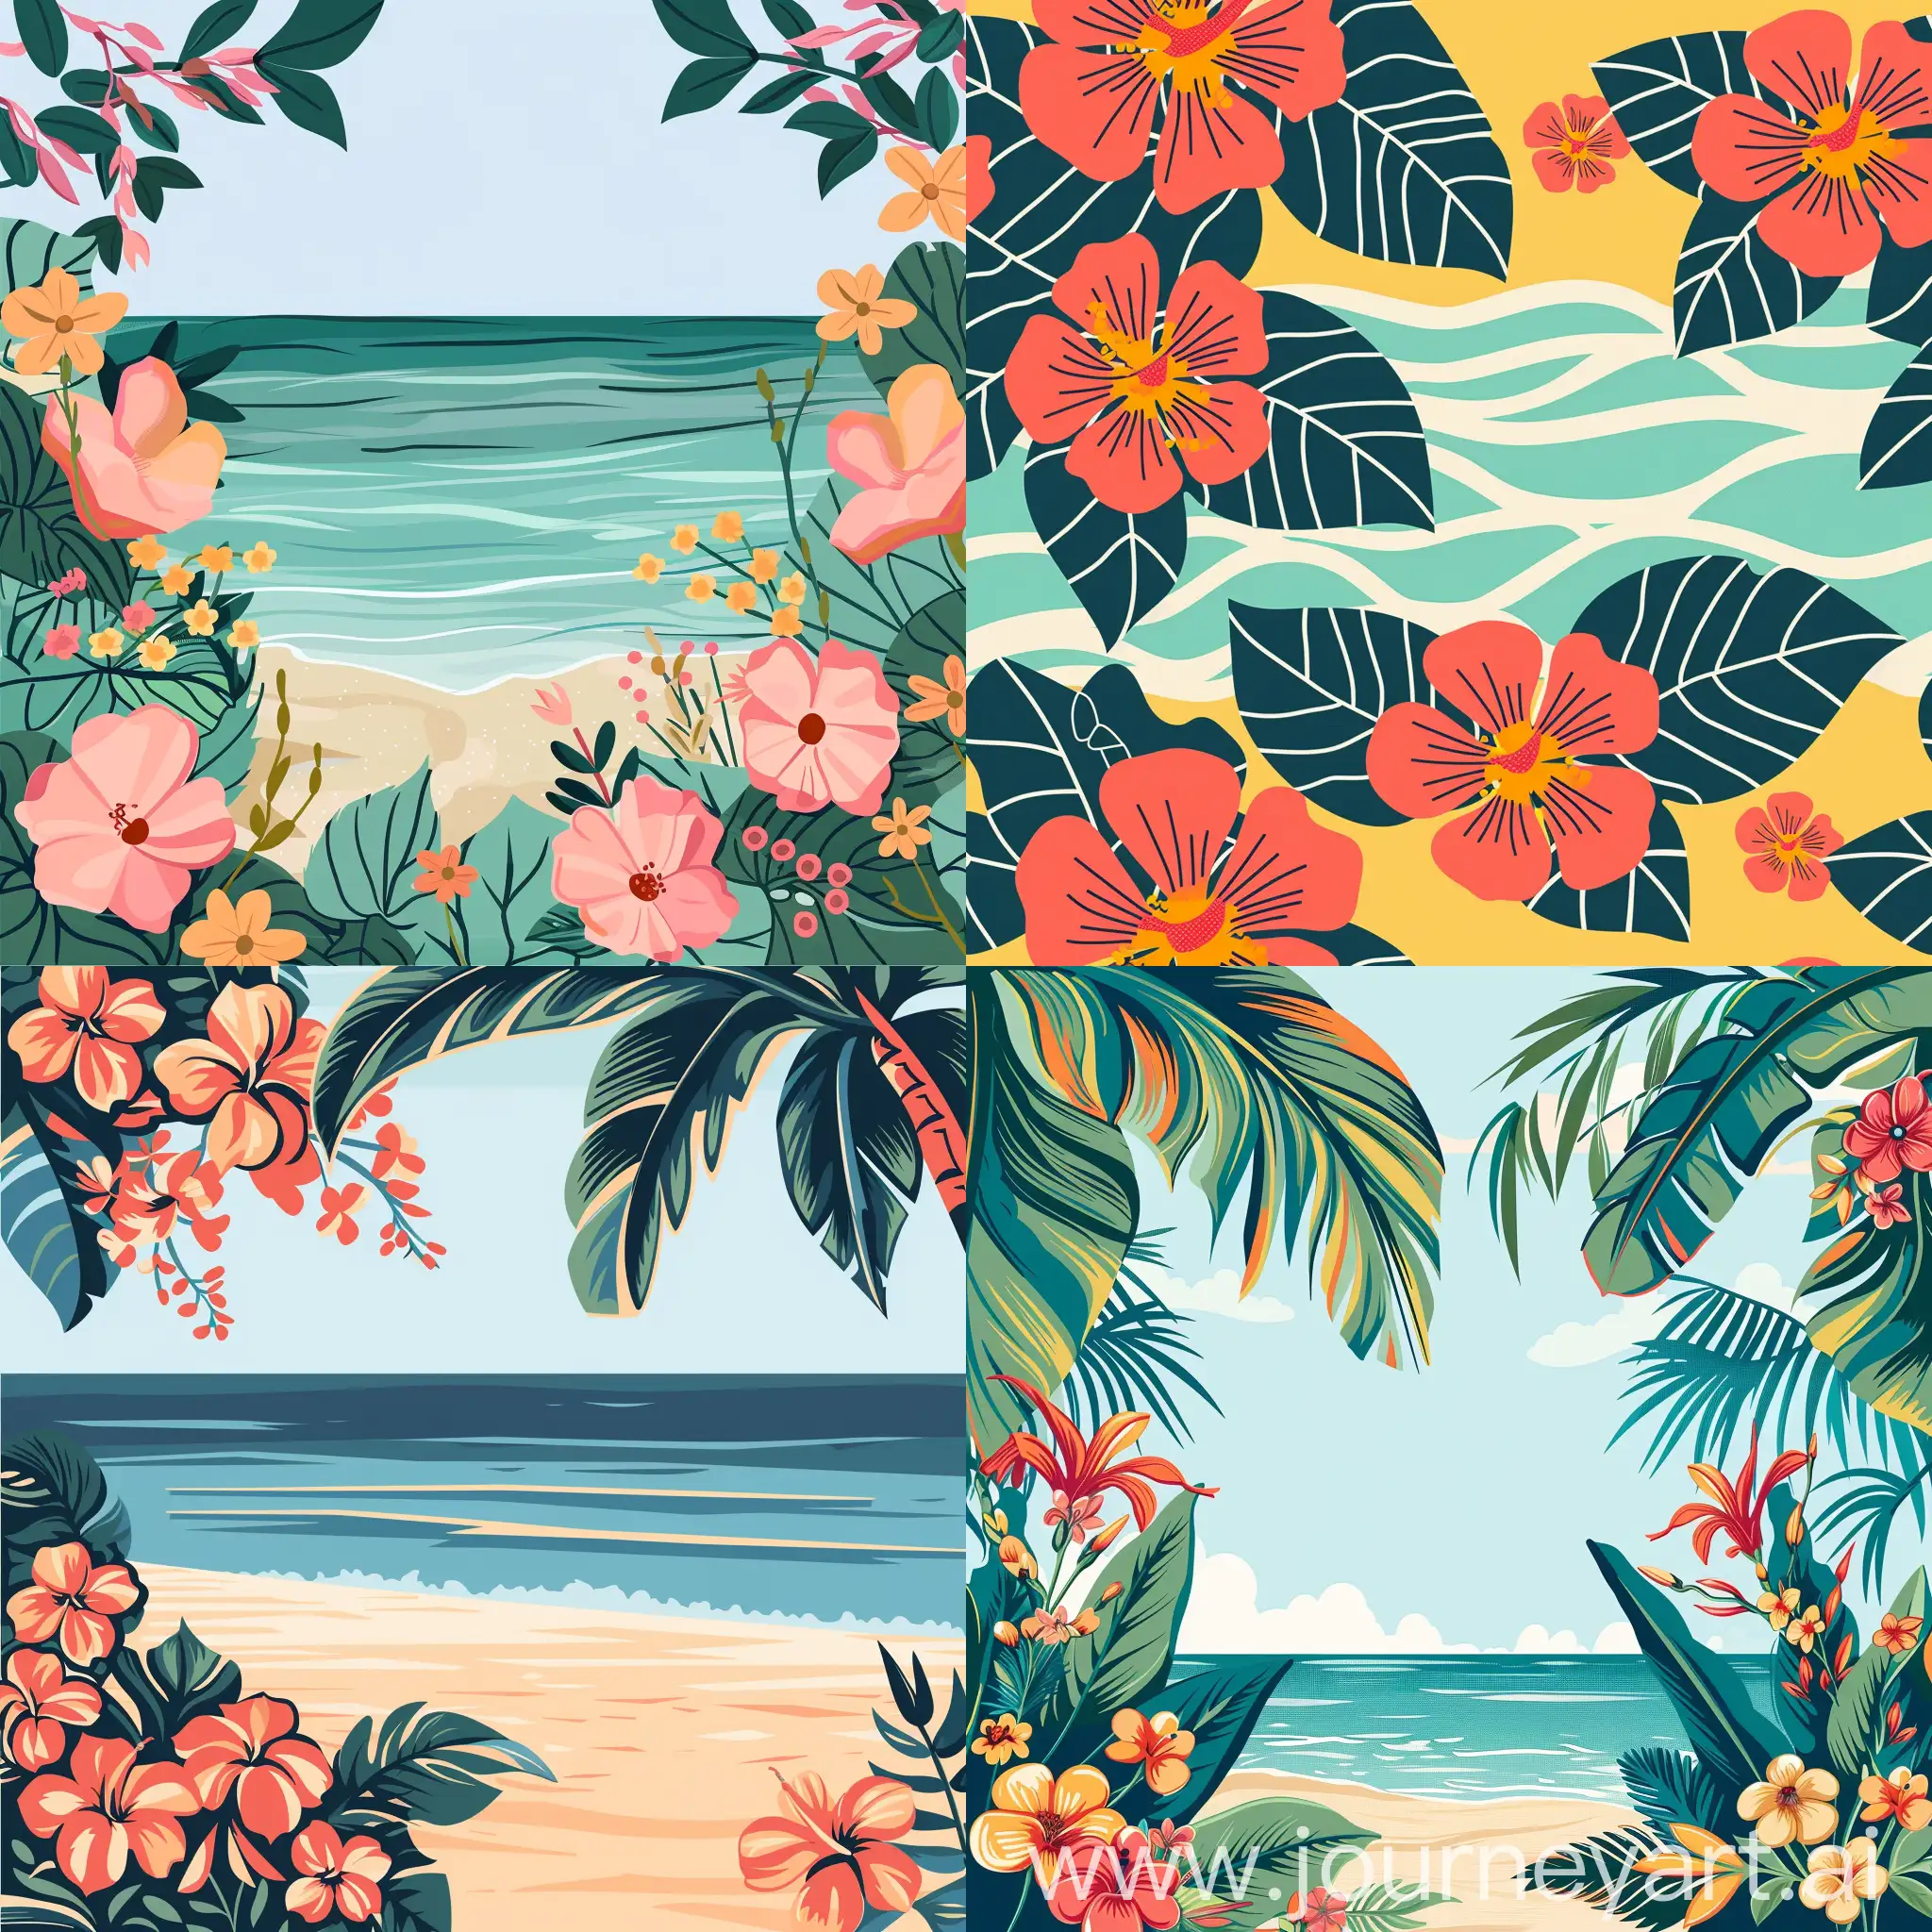 Floral-Patterned-Pixel-Art-on-Beach-Background